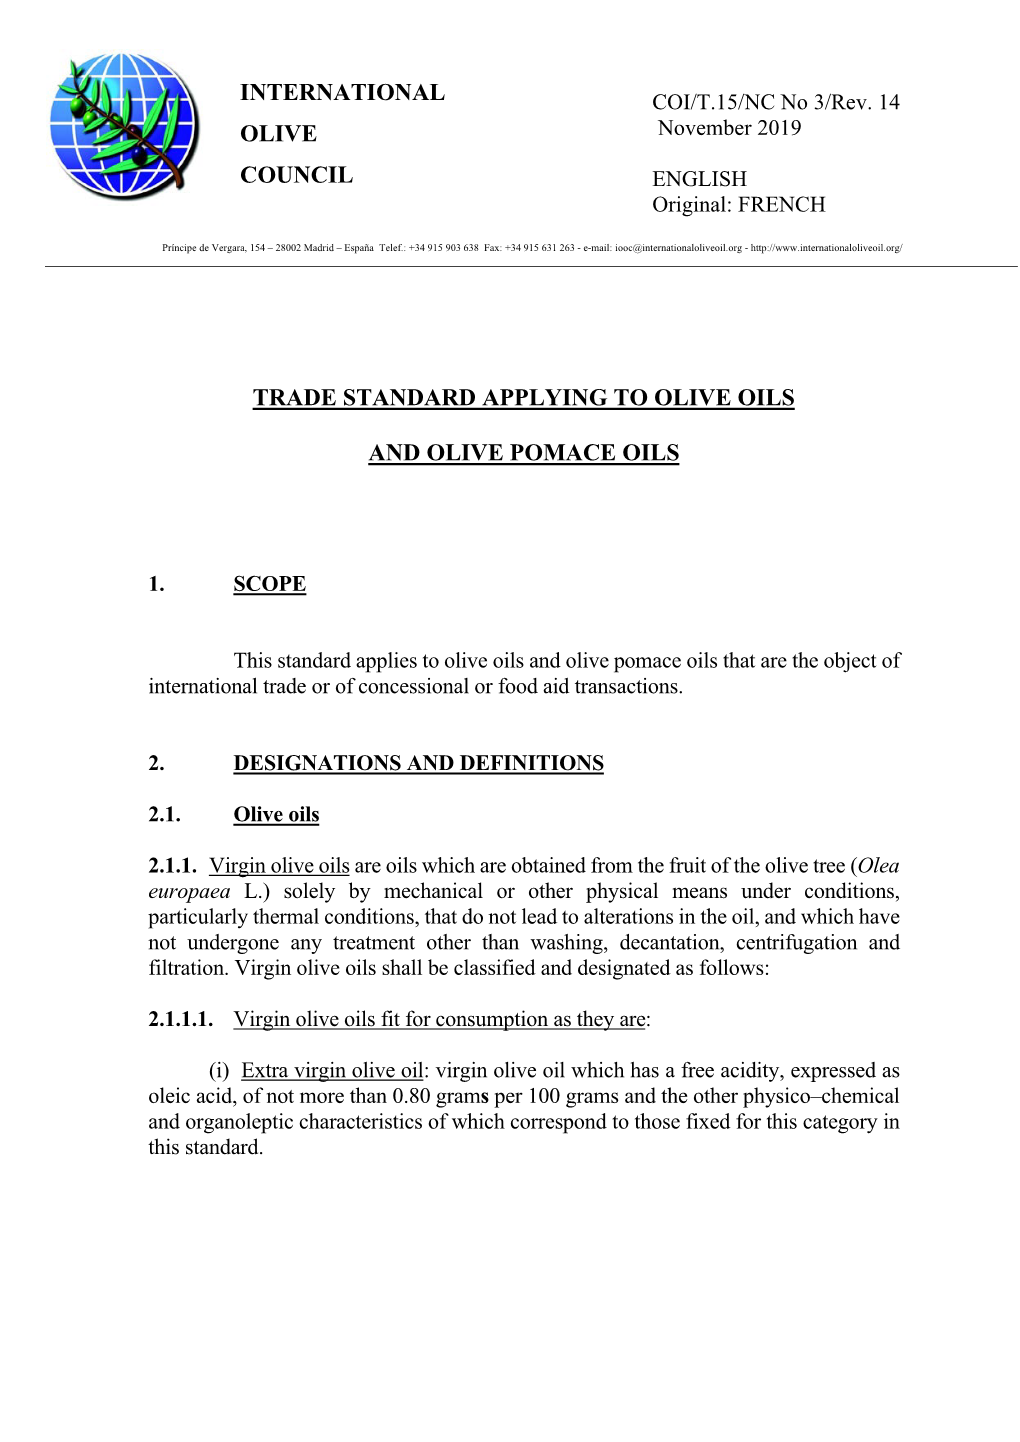 International Olive Council Trade Standard Applying To